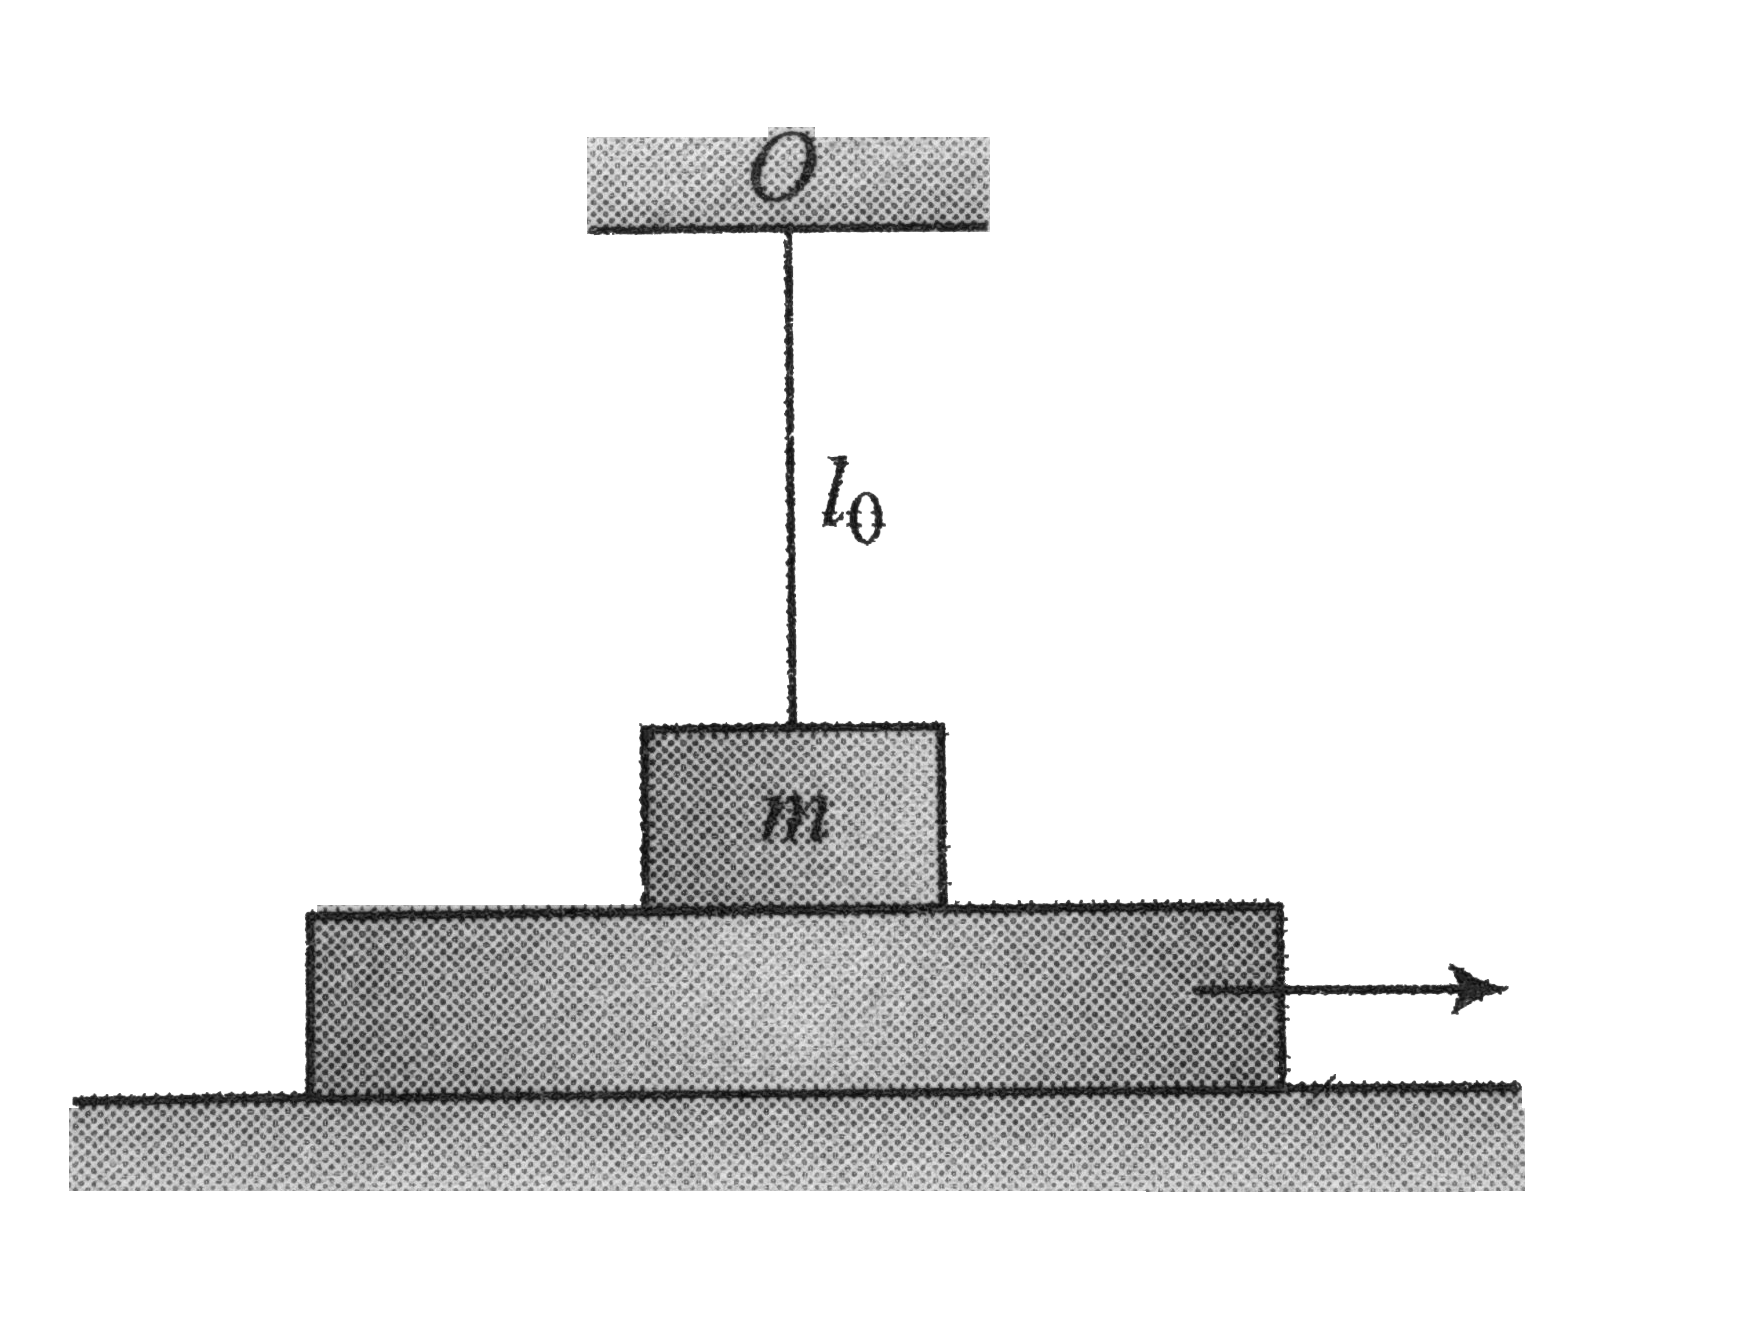 A horizontal plane supports a plank with a bar of mass m placed on it and attached by a light elastic non-deformed cord of length l0, to a point O. The coefficient of friciton between the bar and the plank is equal to m. The plank is slowly shifted to the right until the bar starts sliding over it. It occurs at the moment when the cord derivates from the vertical by an angle theta.      Find the work that has been performed by the moment by the frictional force acting on the bar in the reference frame fixed to the plane.